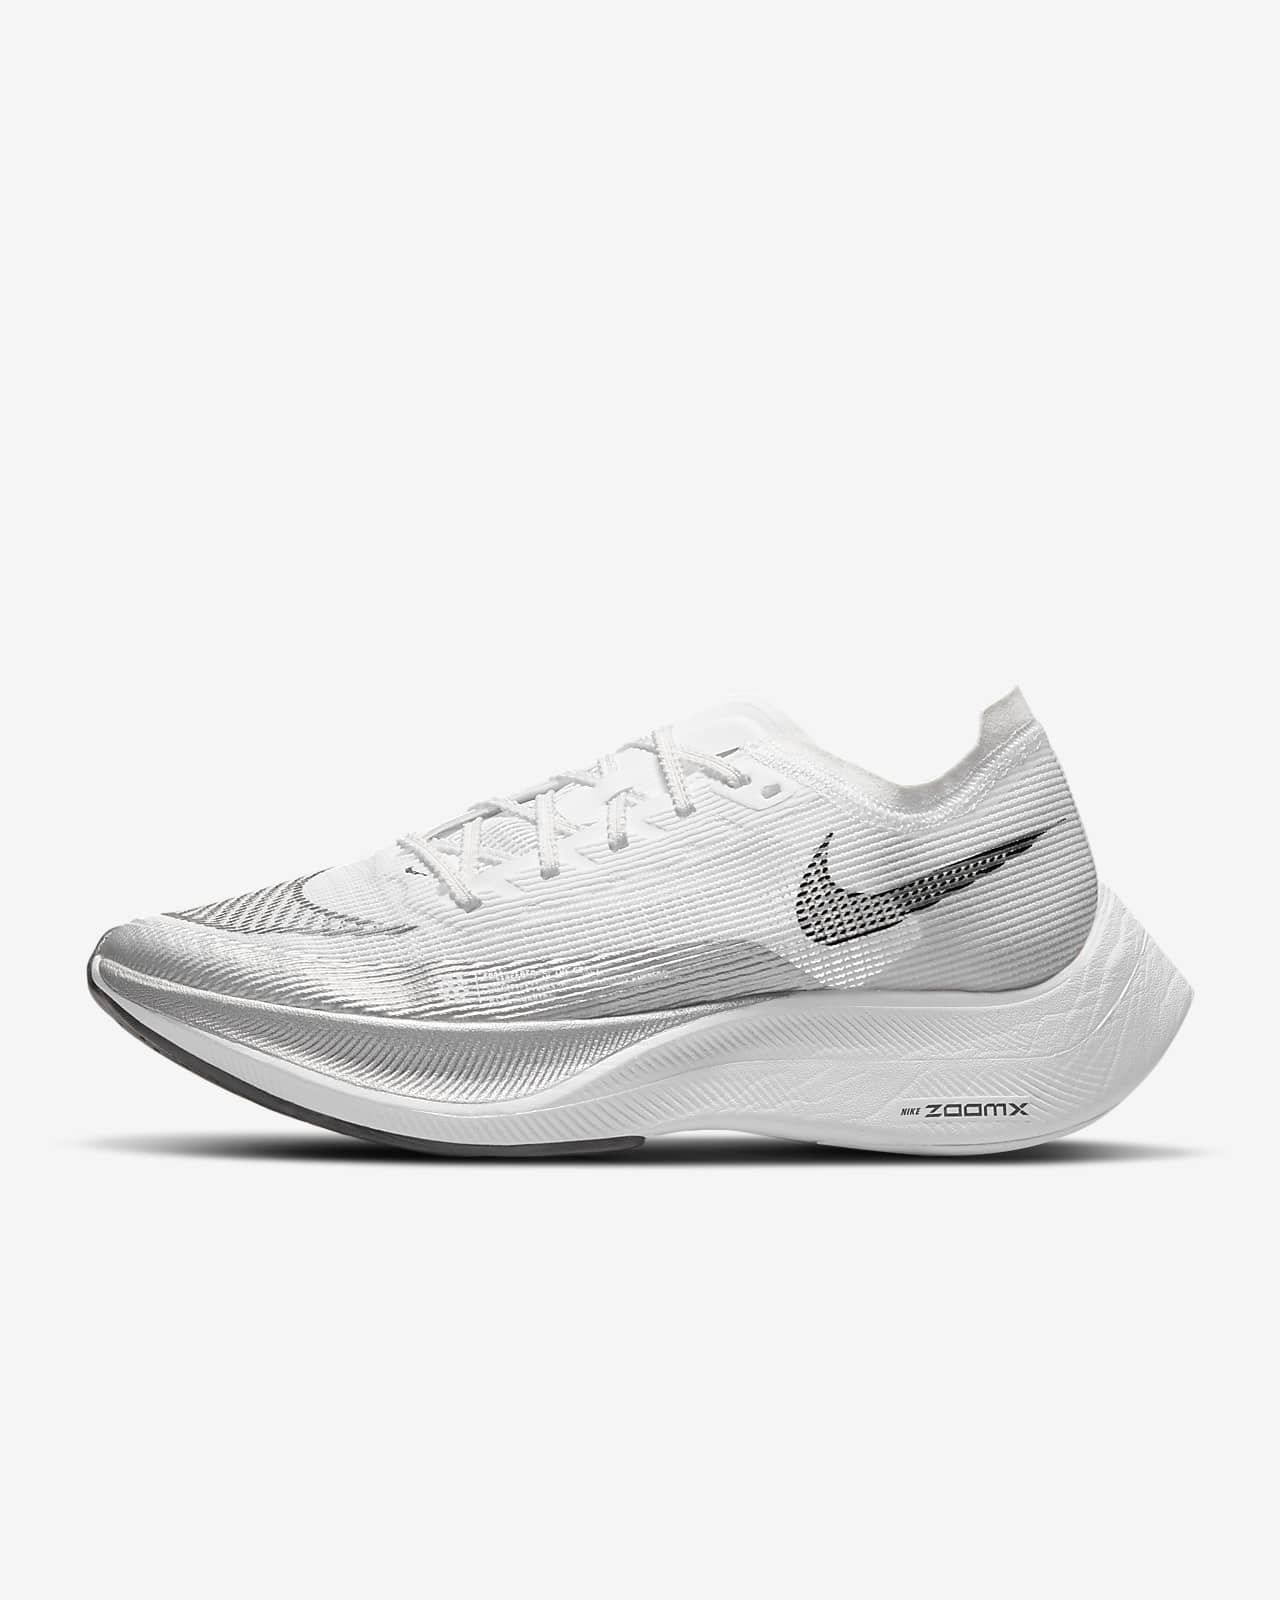 zoomx nike shoes